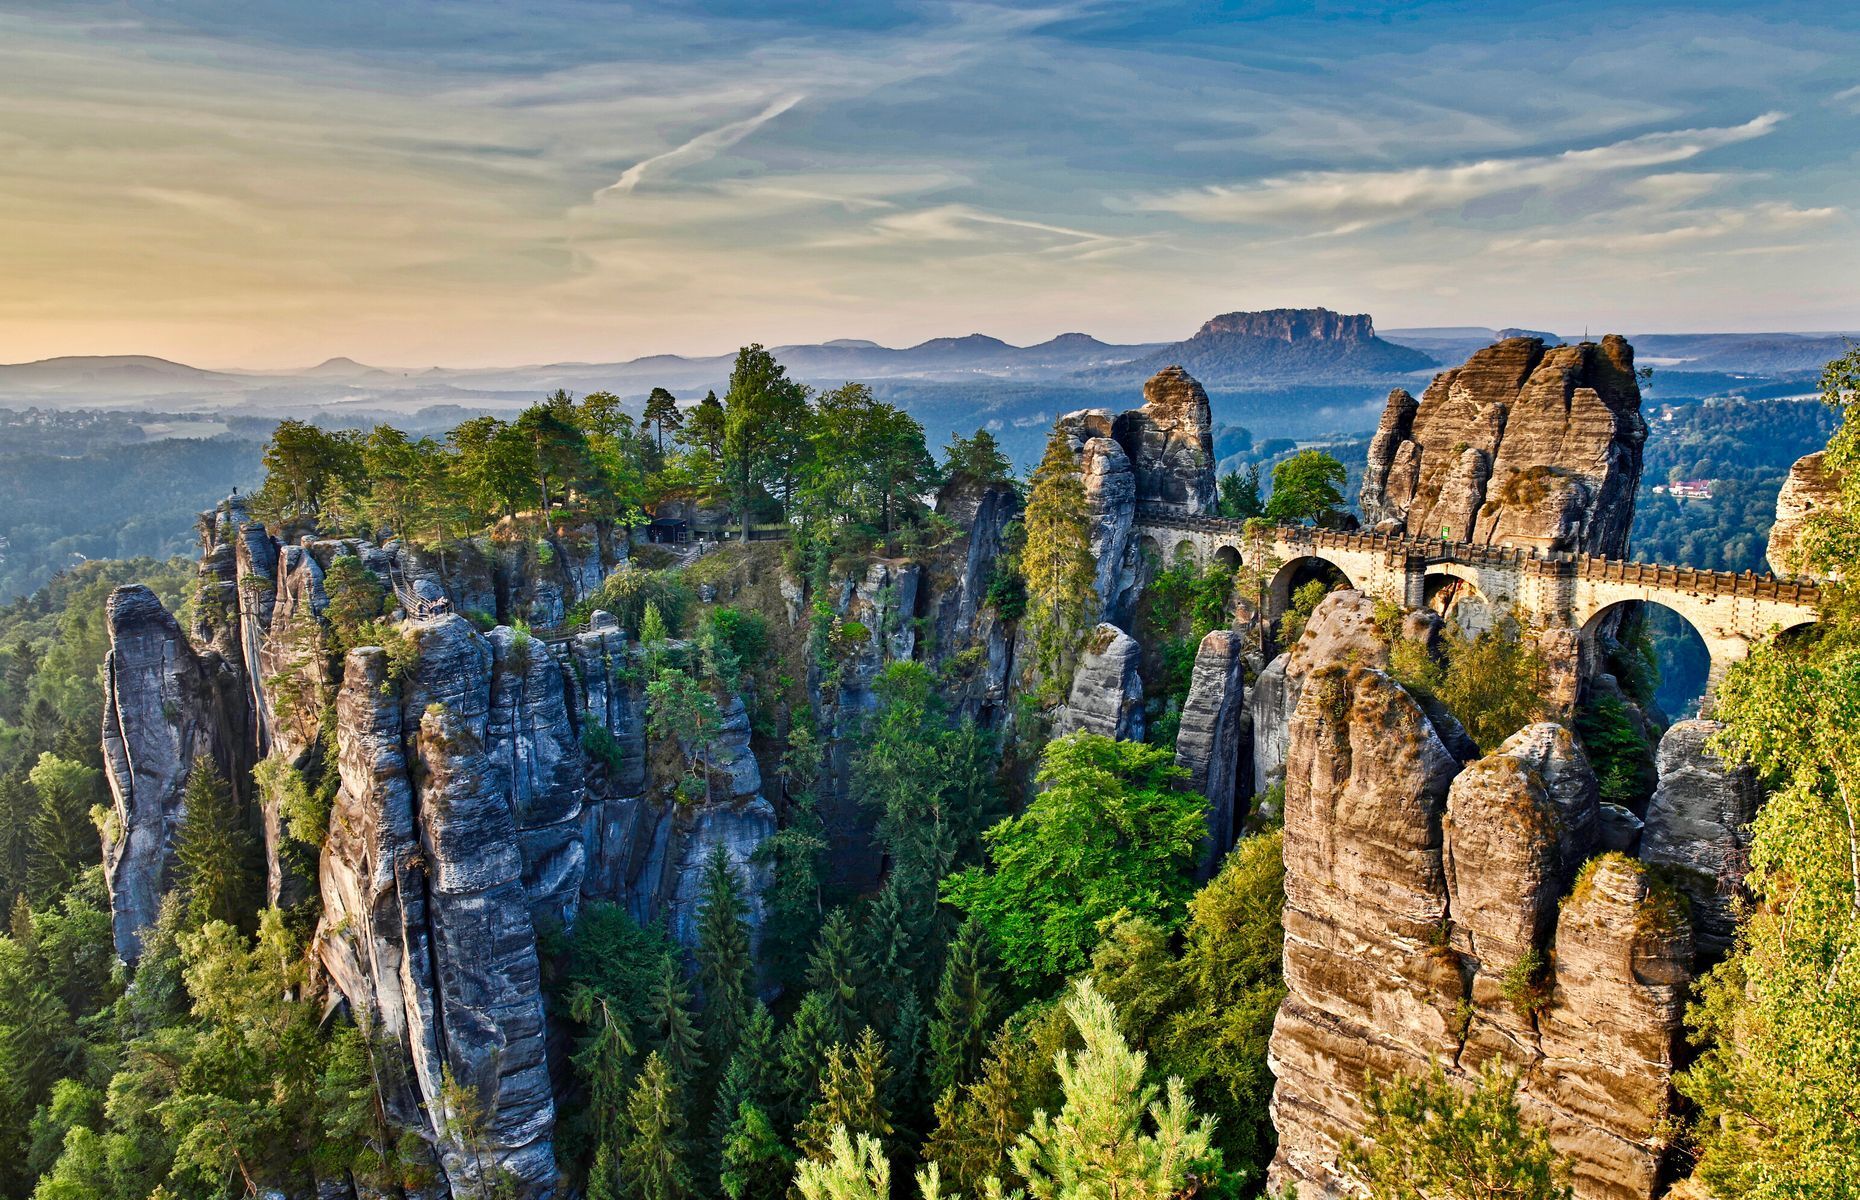 Located in southern Germany’s Saxon Switzerland National Park, <a href="https://www.saechsische-schweiz.de/en/" rel="noreferrer noopener">Bastei Bridge</a> is an impressive 305-metre (1,000-foot) rock formation created by erosion more than one million years ago. The view of the Elbe Valley is simply incredible.